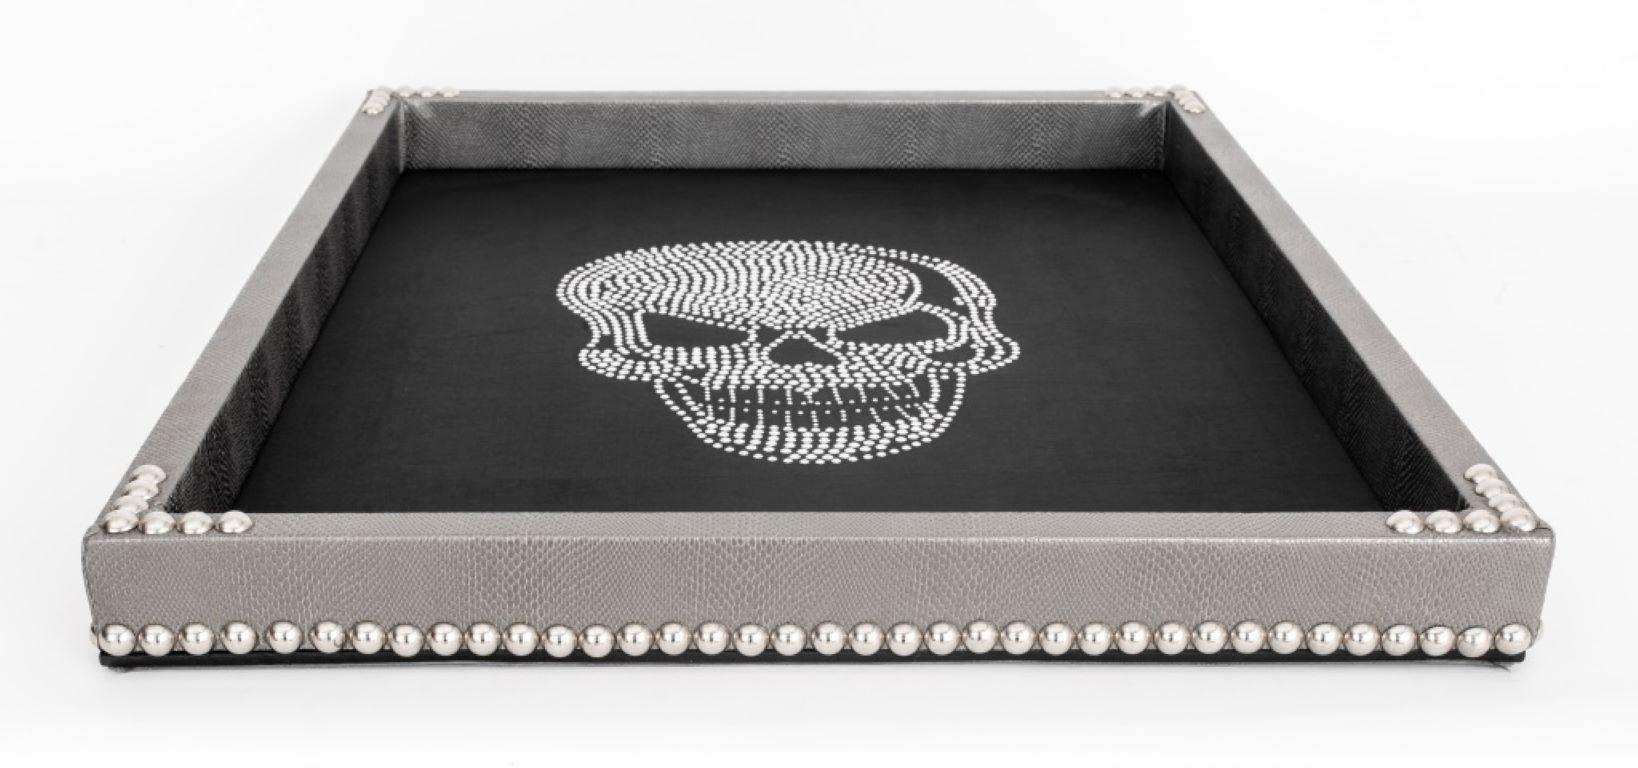 Large glam rock skull tray, with a studded skull on a faux silk background, surrounded by a faux snakeskin studded ledge, and ultrasuede bottom. 

Dimensions: 2.5